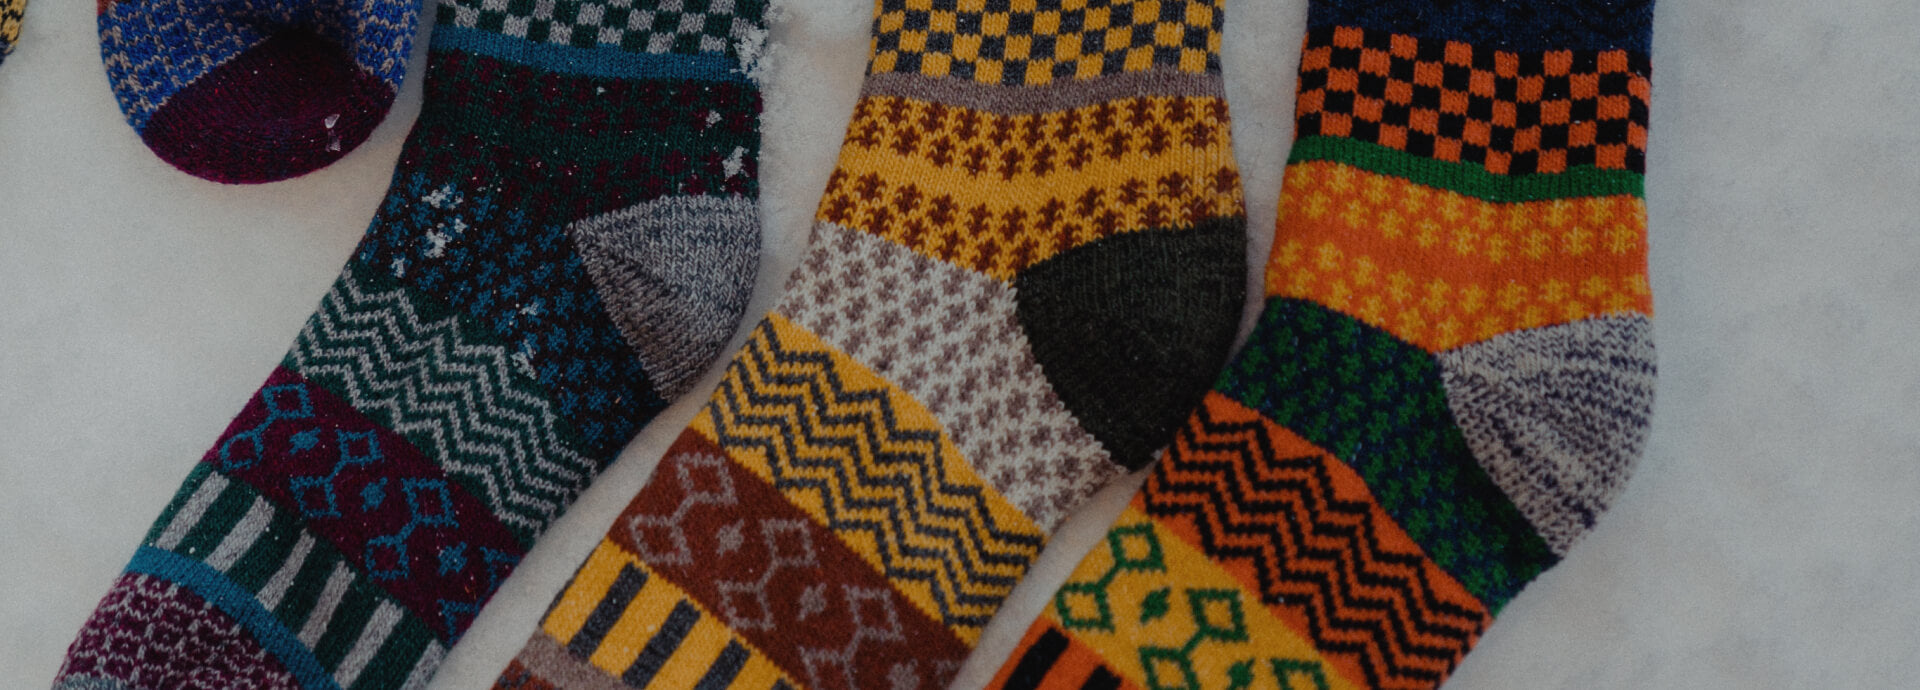 Cotton, wool or cashmere - which material is best for socks